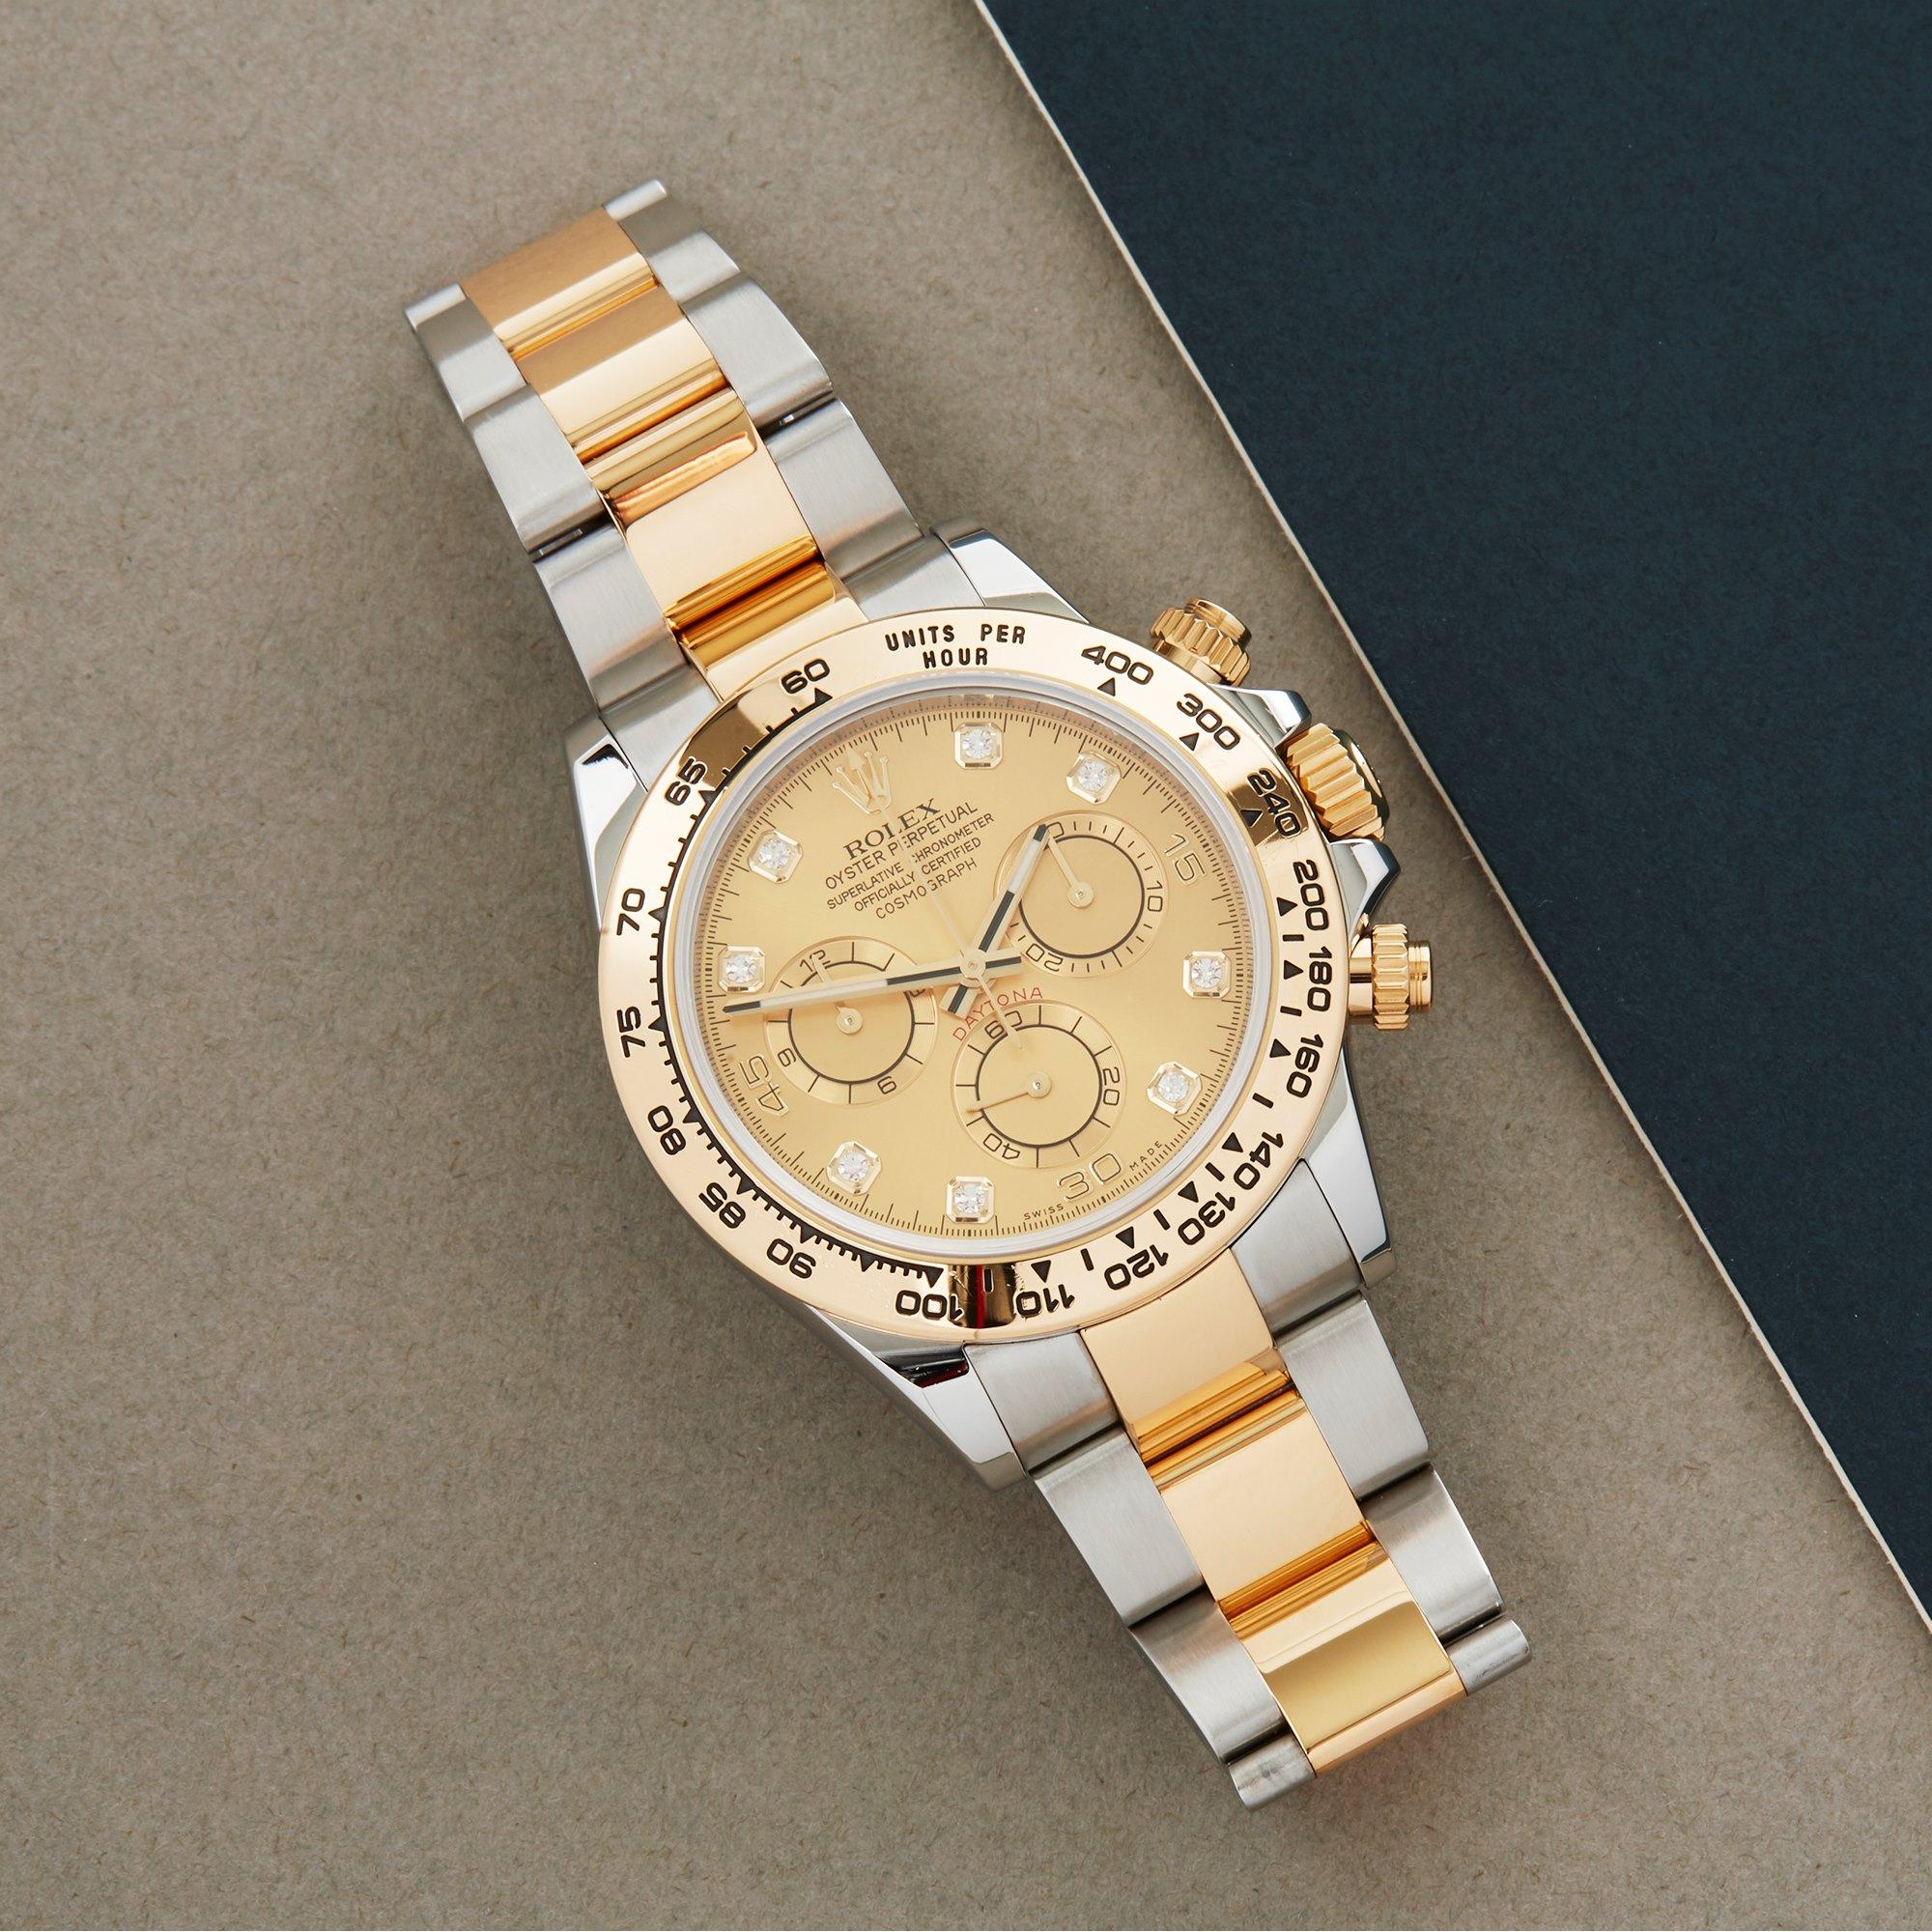 Xupes Reference: W007544
Manufacturer: Rolex
Model: Daytona
Model Variant: 0
Model Number: 116503
Age: 2010
Gender: Men
Complete With: Rolex Box
Dial: Champagne With Diamond Markers
Glass: Sapphire Crystal
Case Size: 40mm
Case Material: Stainless